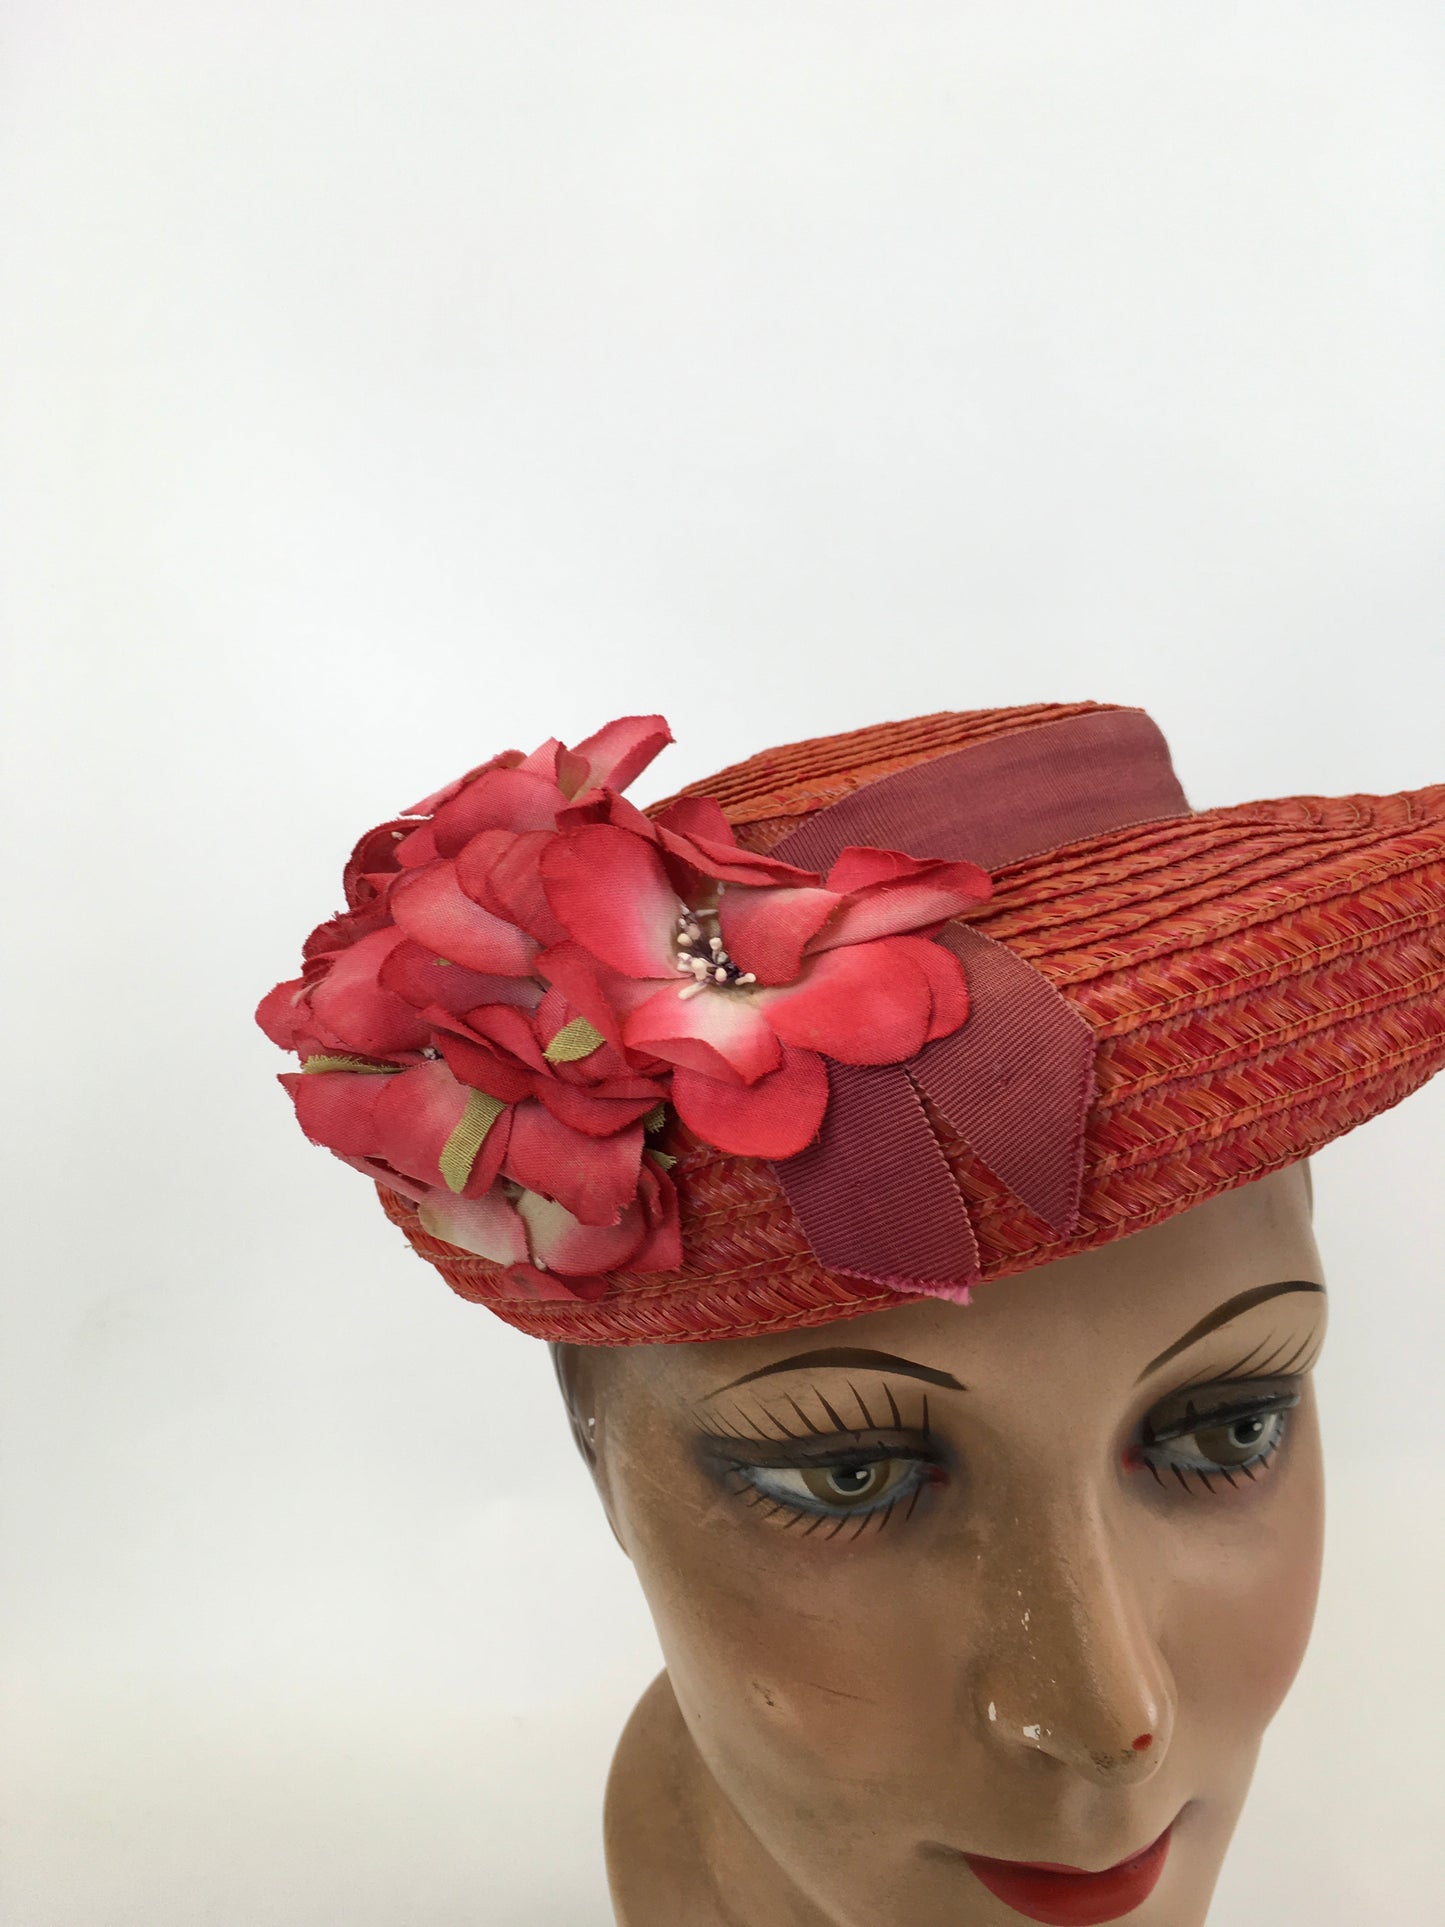 Original 1940’s Darling Straw Hat - In Coral & Red Adorned with Millinery Flora